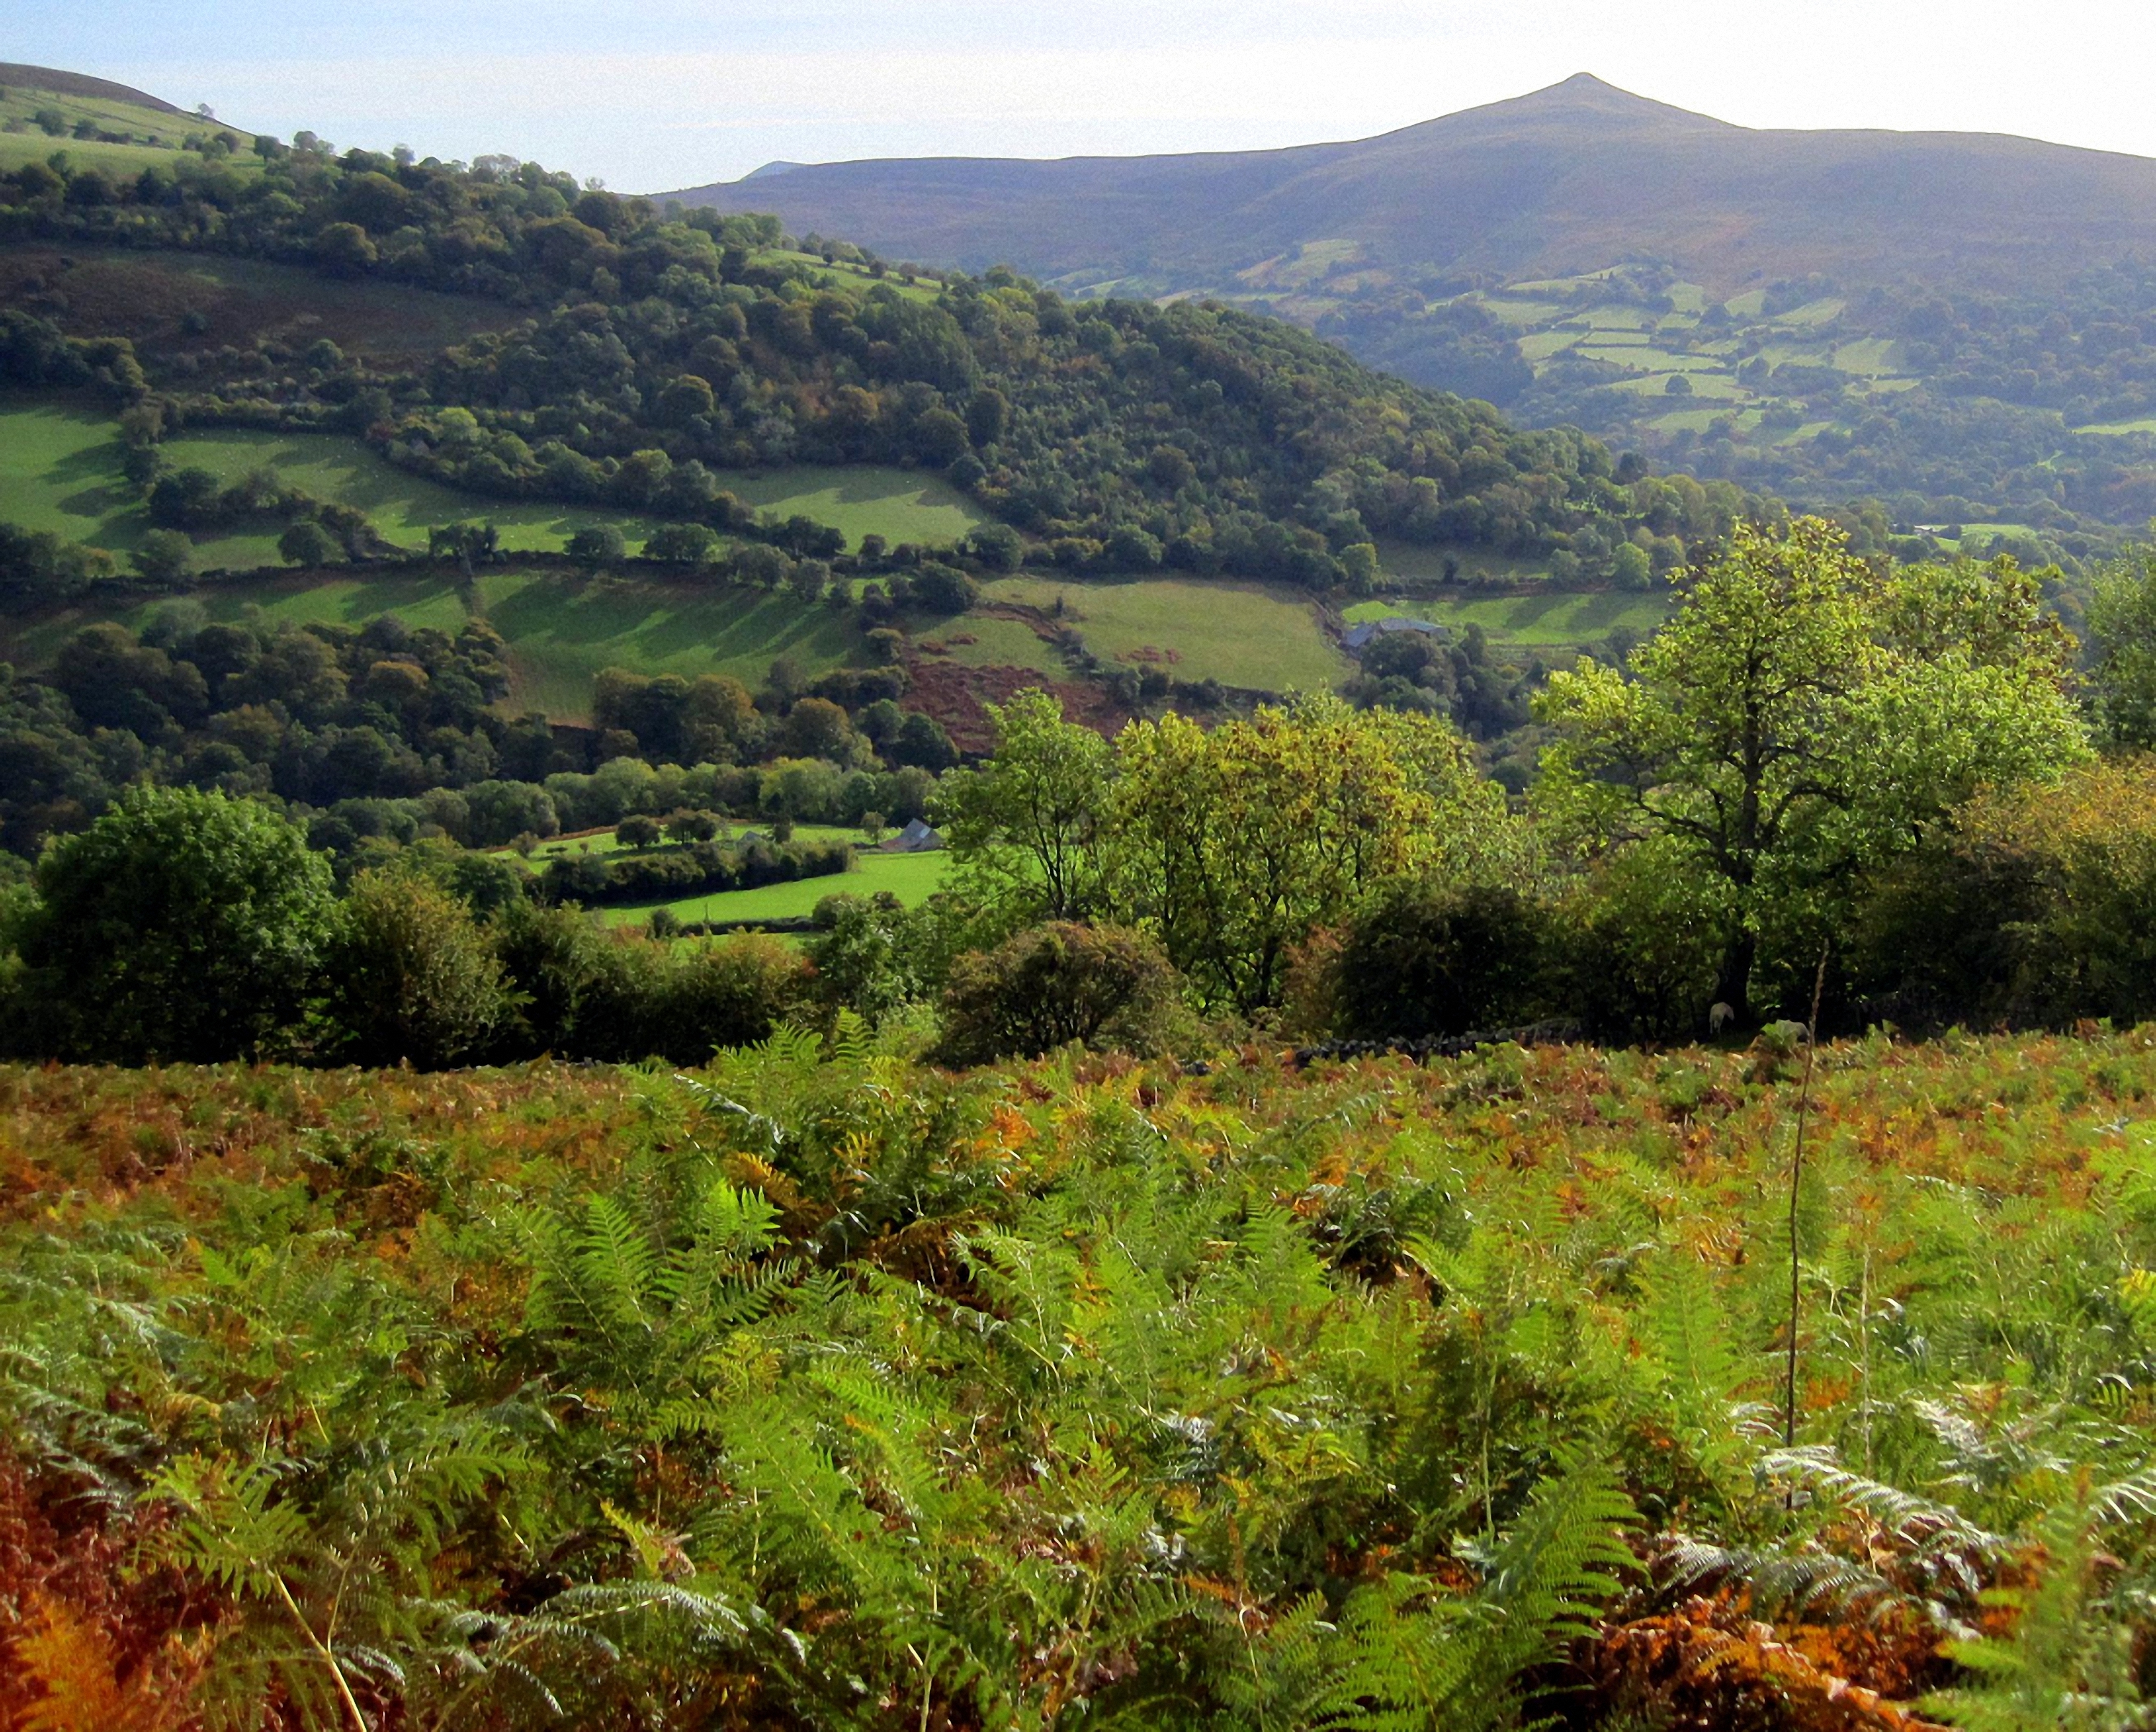 Looking towards the Sugarloaf, Photo by Marian Parsons